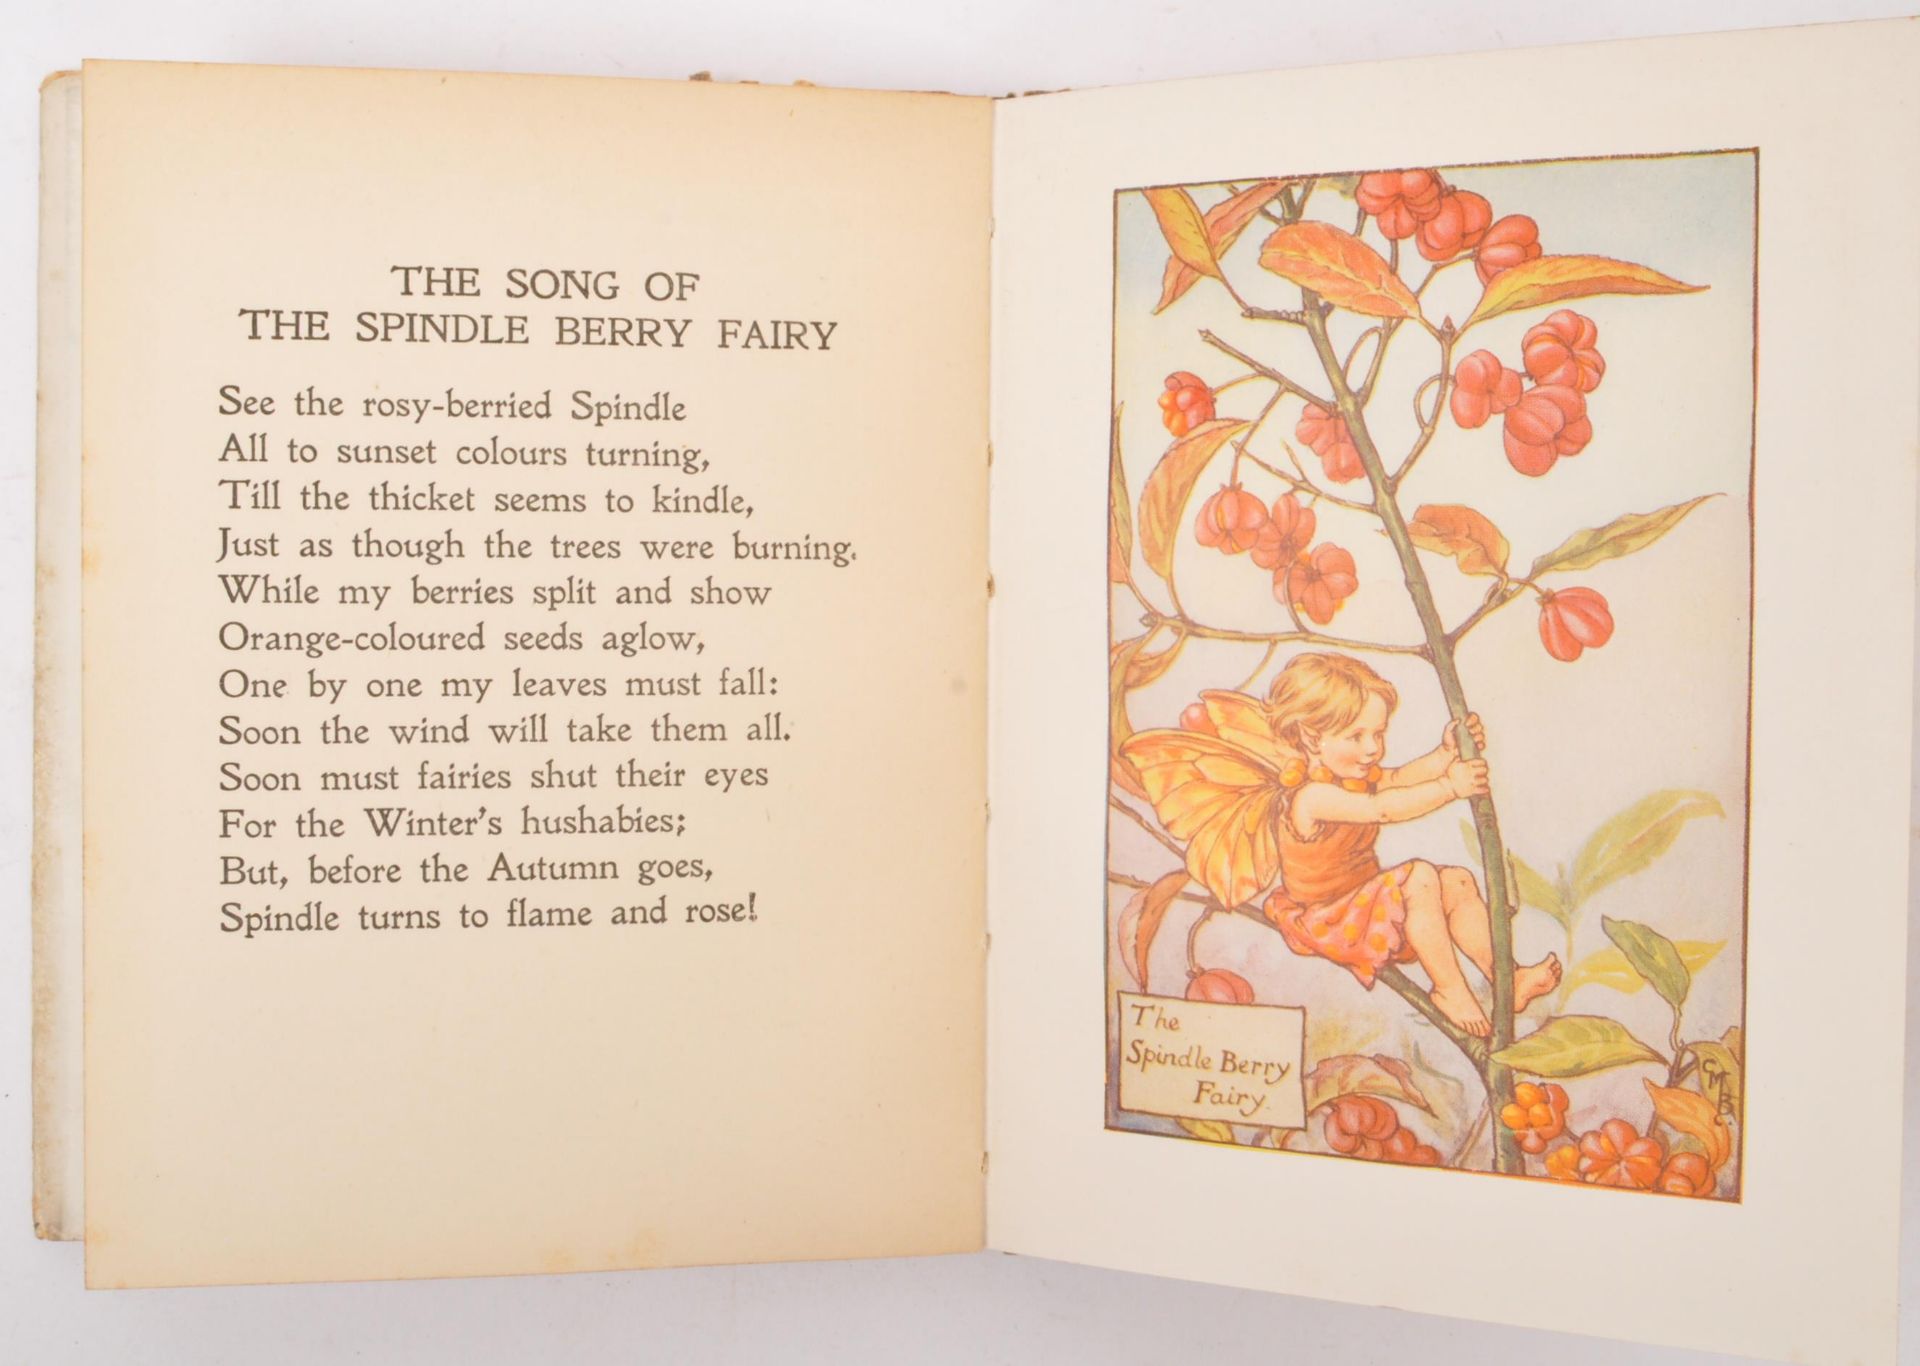 1923 FLOWER FAIRIES OF THE AUTUMN FIRST EDITION SMALL BOOK - Image 5 of 7